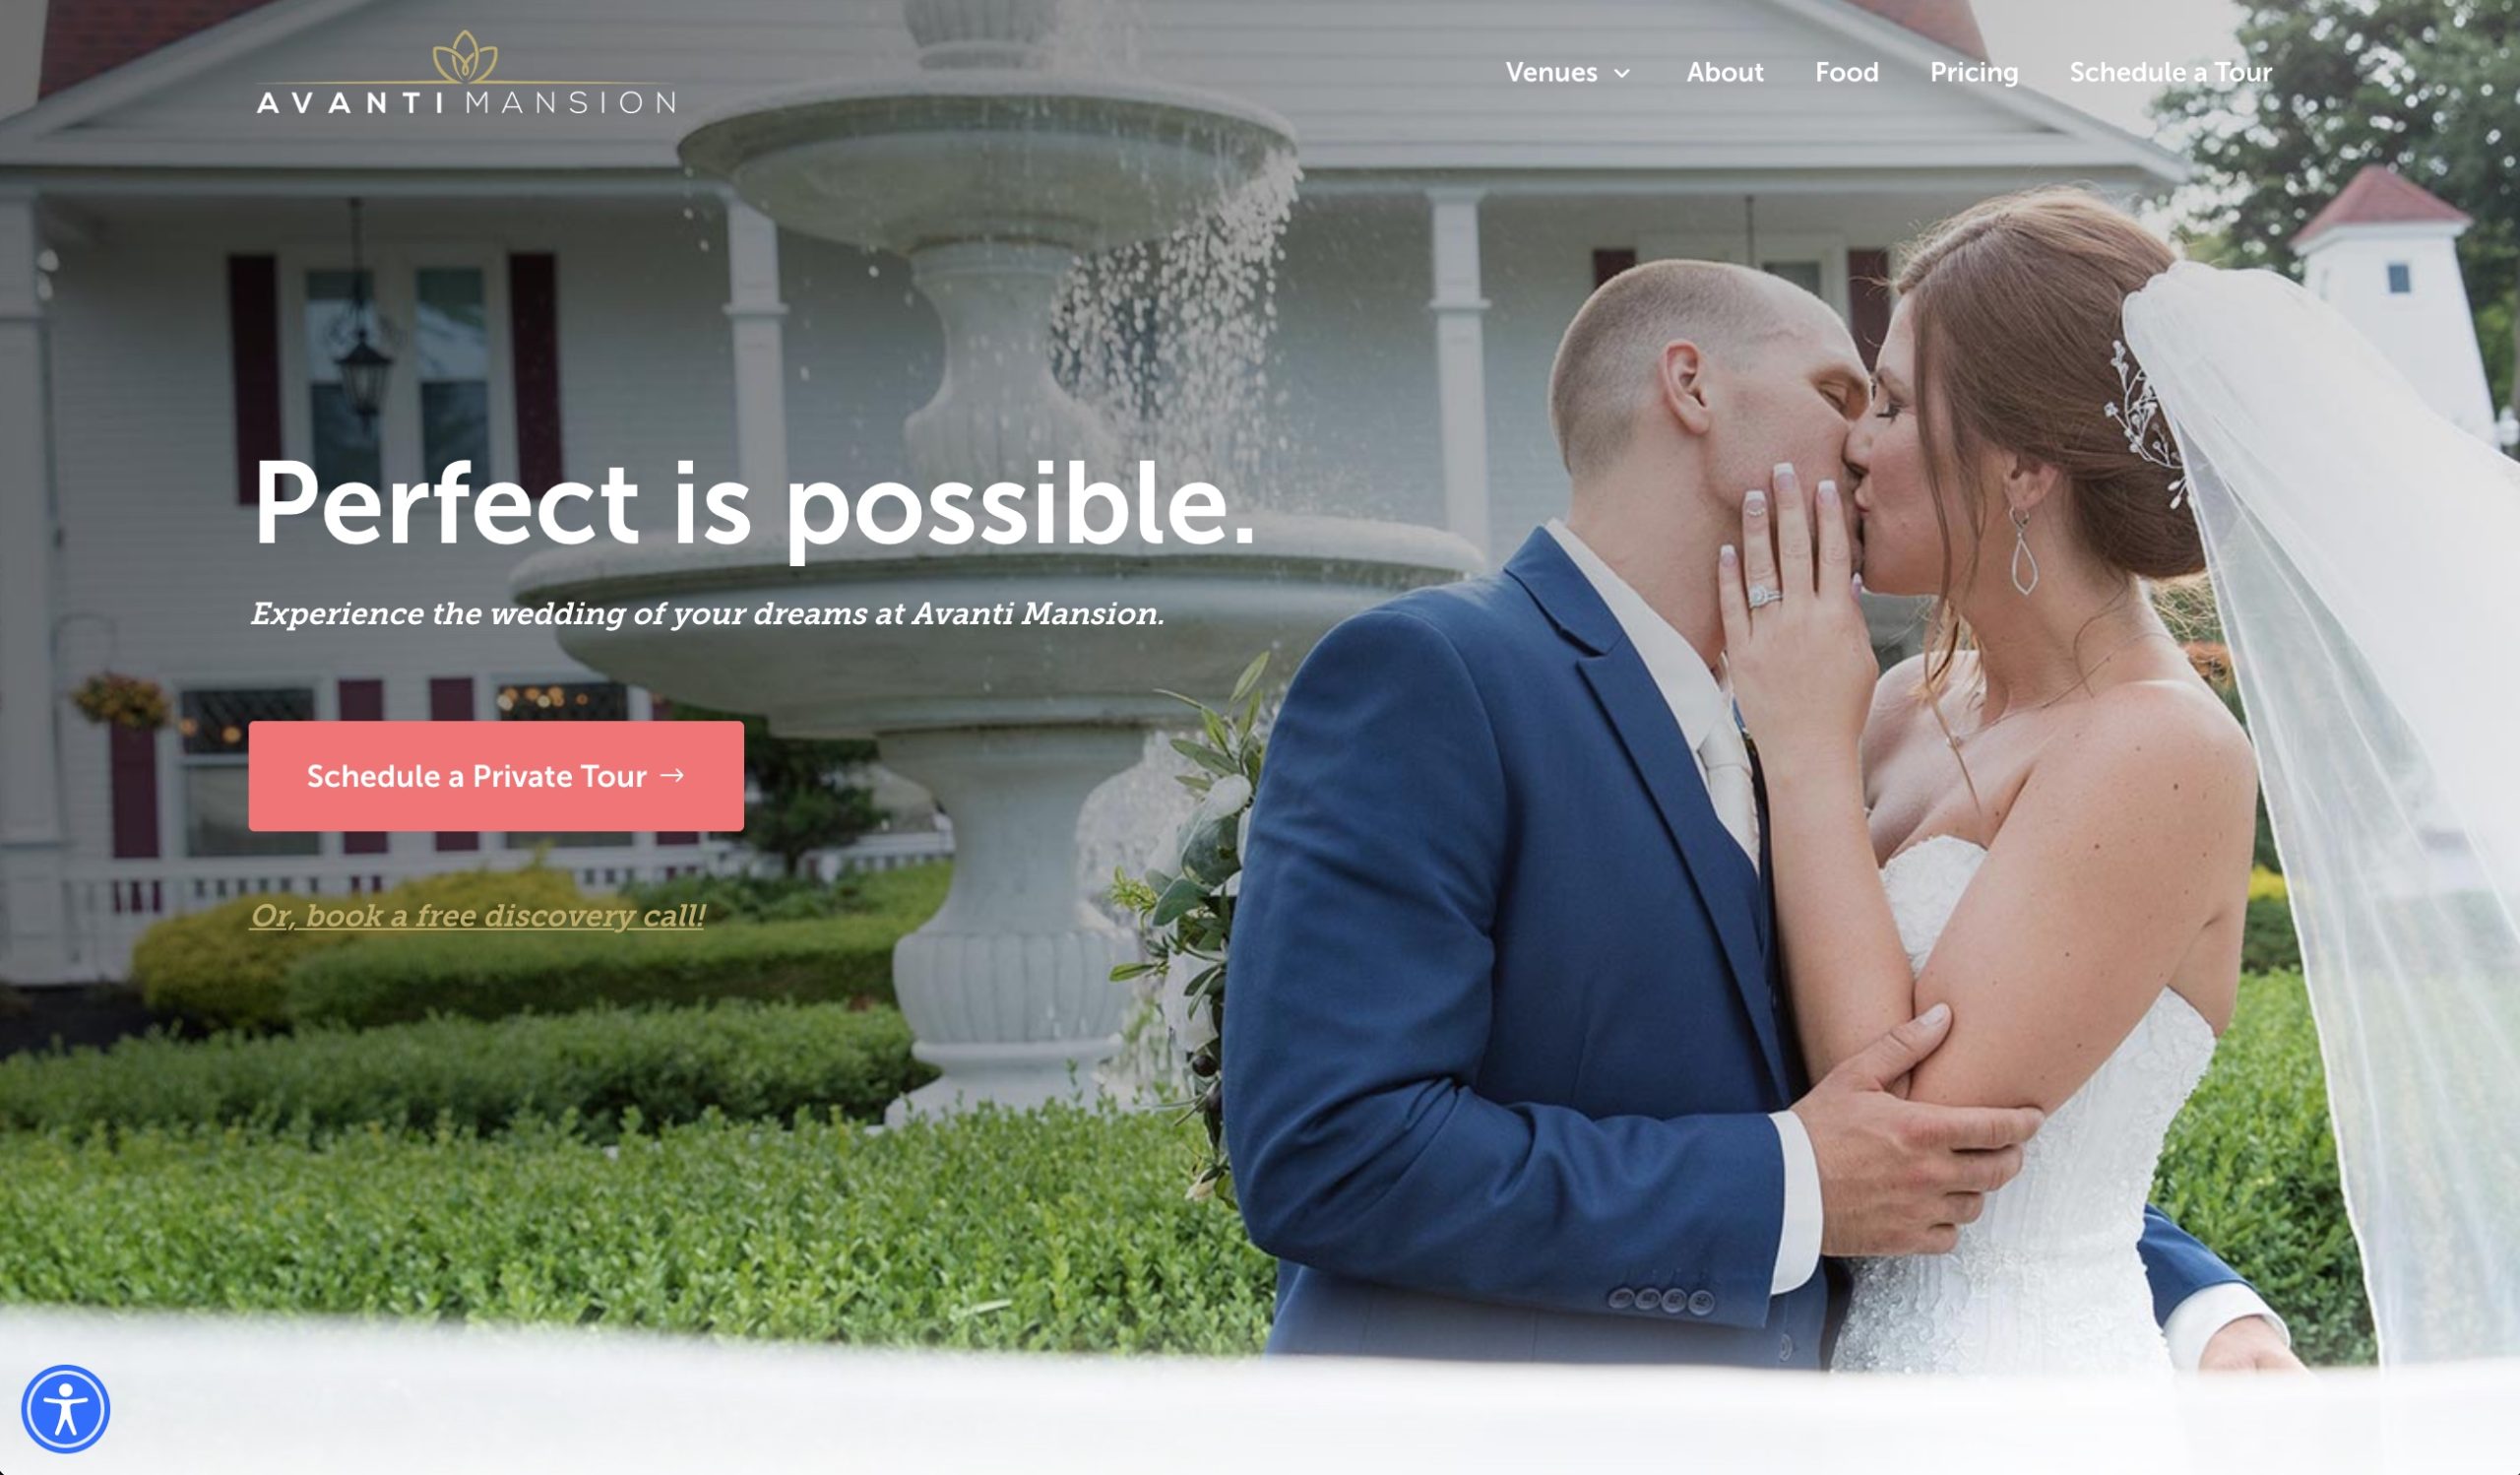 Avanti Mansion: The Award-Winning, Simplified Planning Process Wedding Venue That Gives Back to the Community